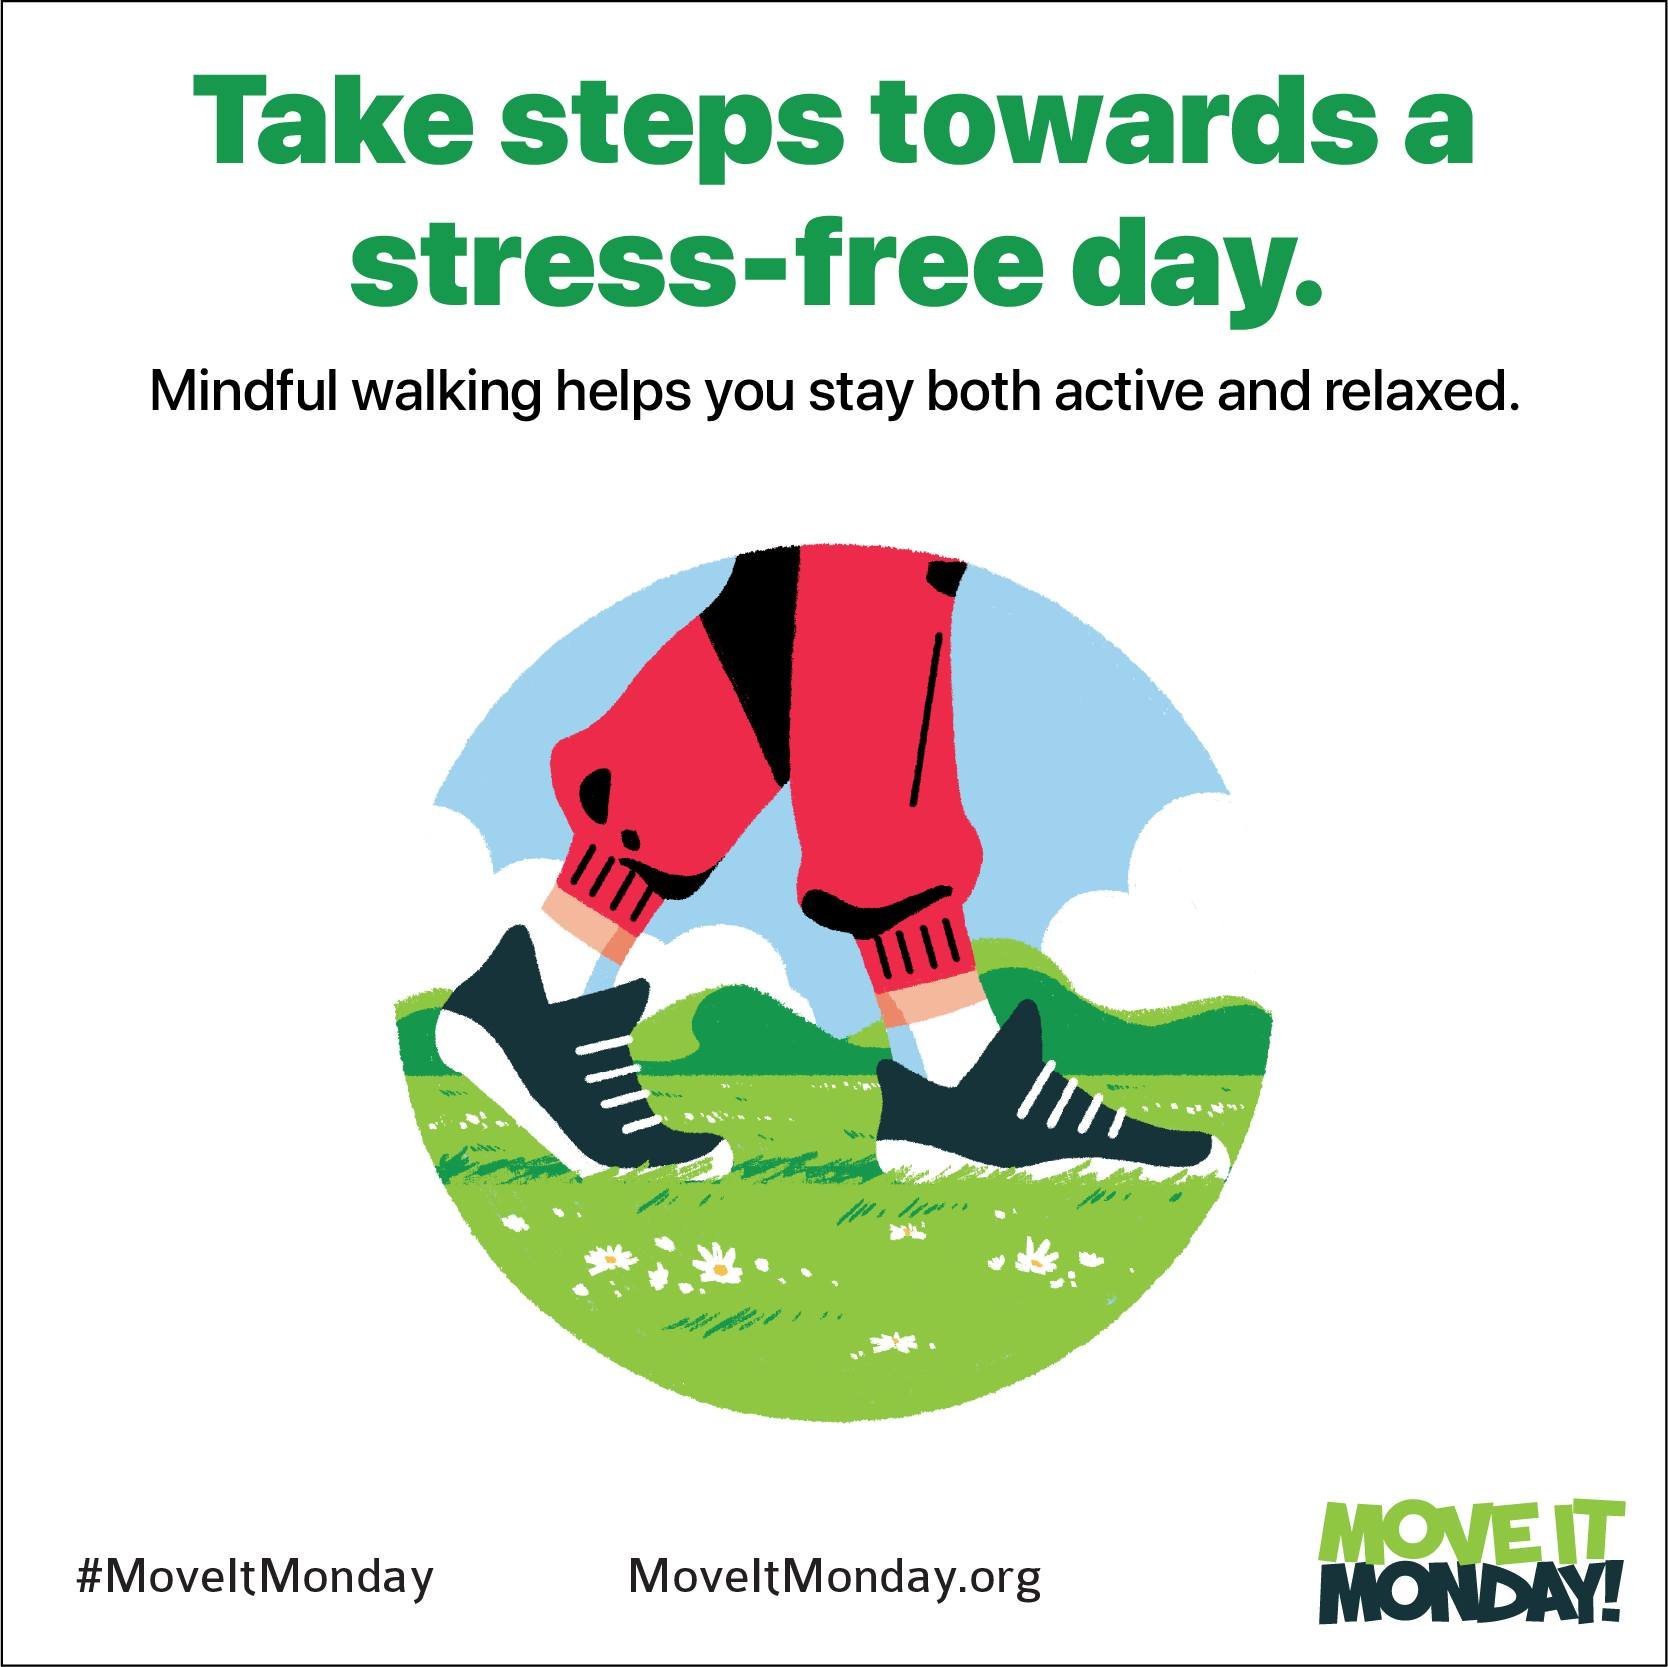 👟 Make Monday an occasion to try mindful walking when you need to de-stress for a few minutes between activities.

Check out the steps to get the most out of your mindful walk by visiting mondaycampaigns.org/move-it-monday/three-simple-steps-for-min